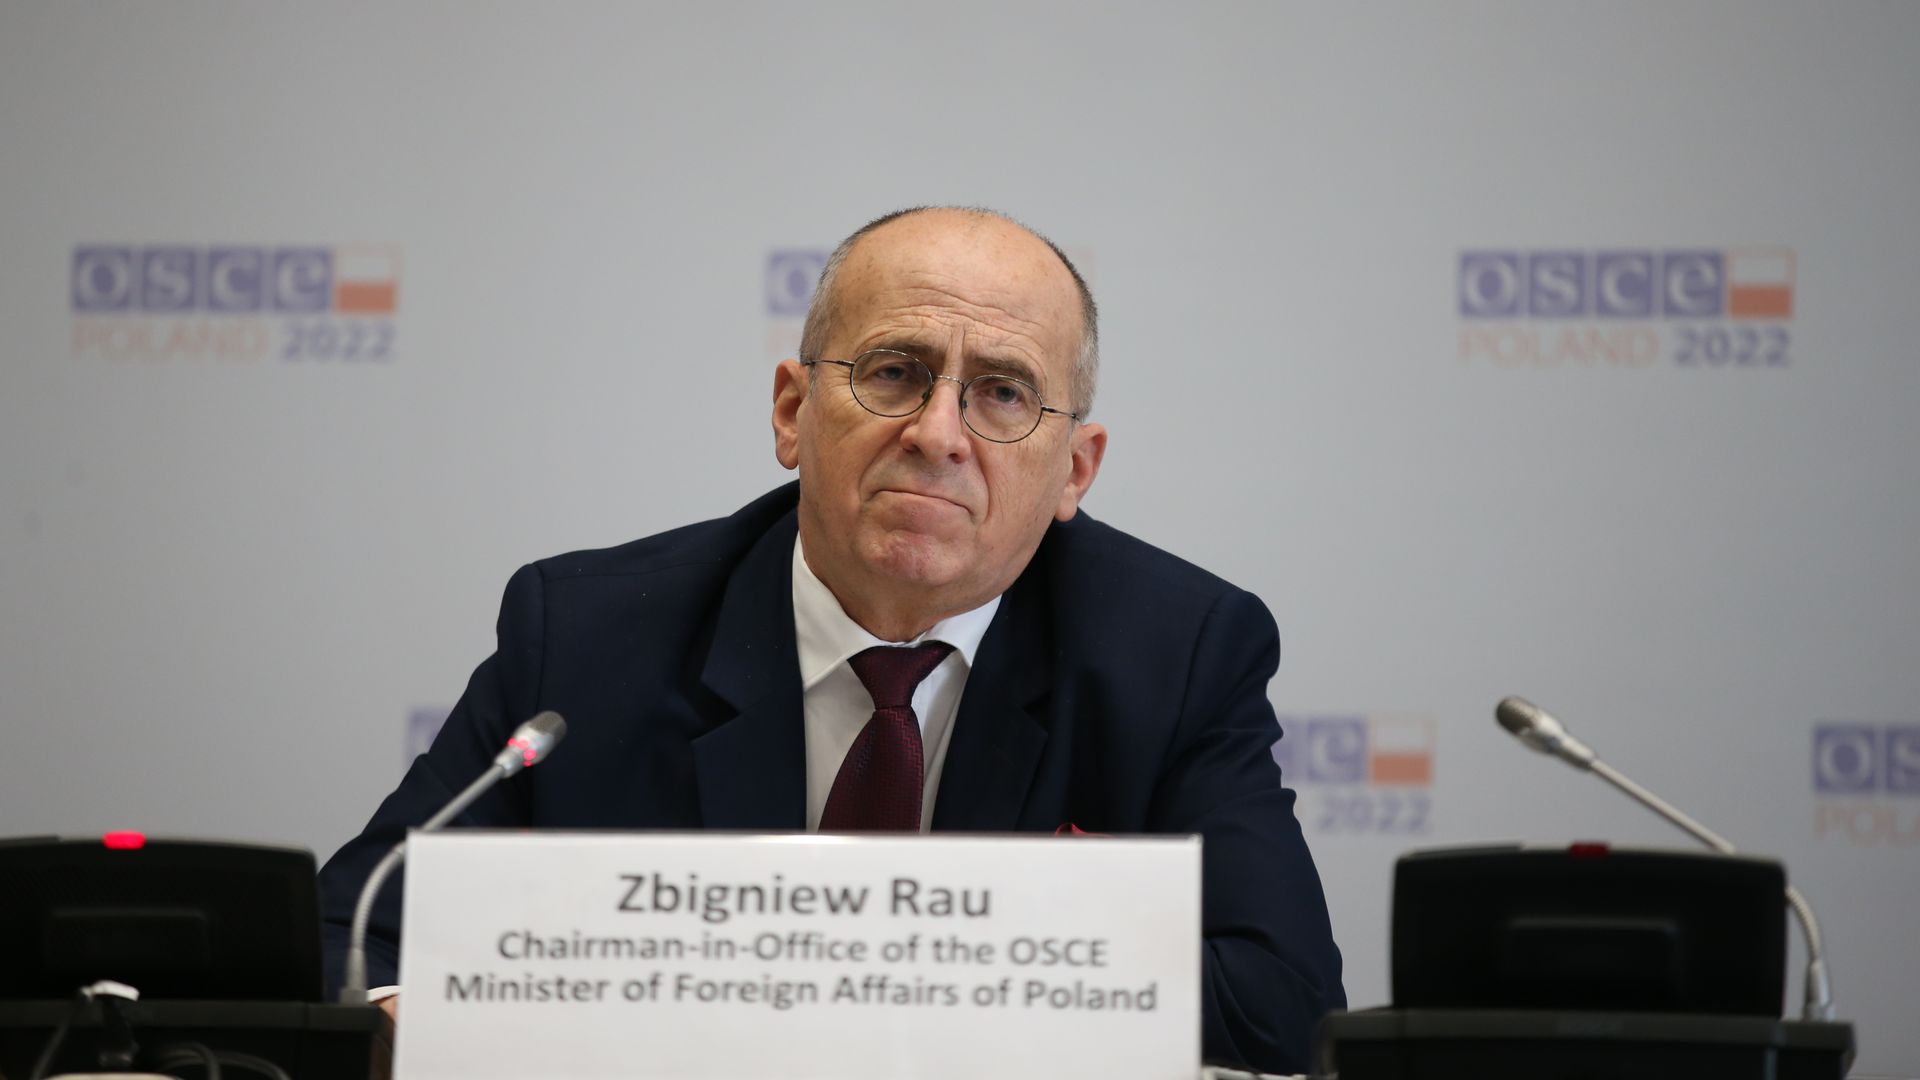 Polish Foreign Minister and Incoming Chairperson in Office Zbigniew Rau is seen addressing reporters at a media conference.